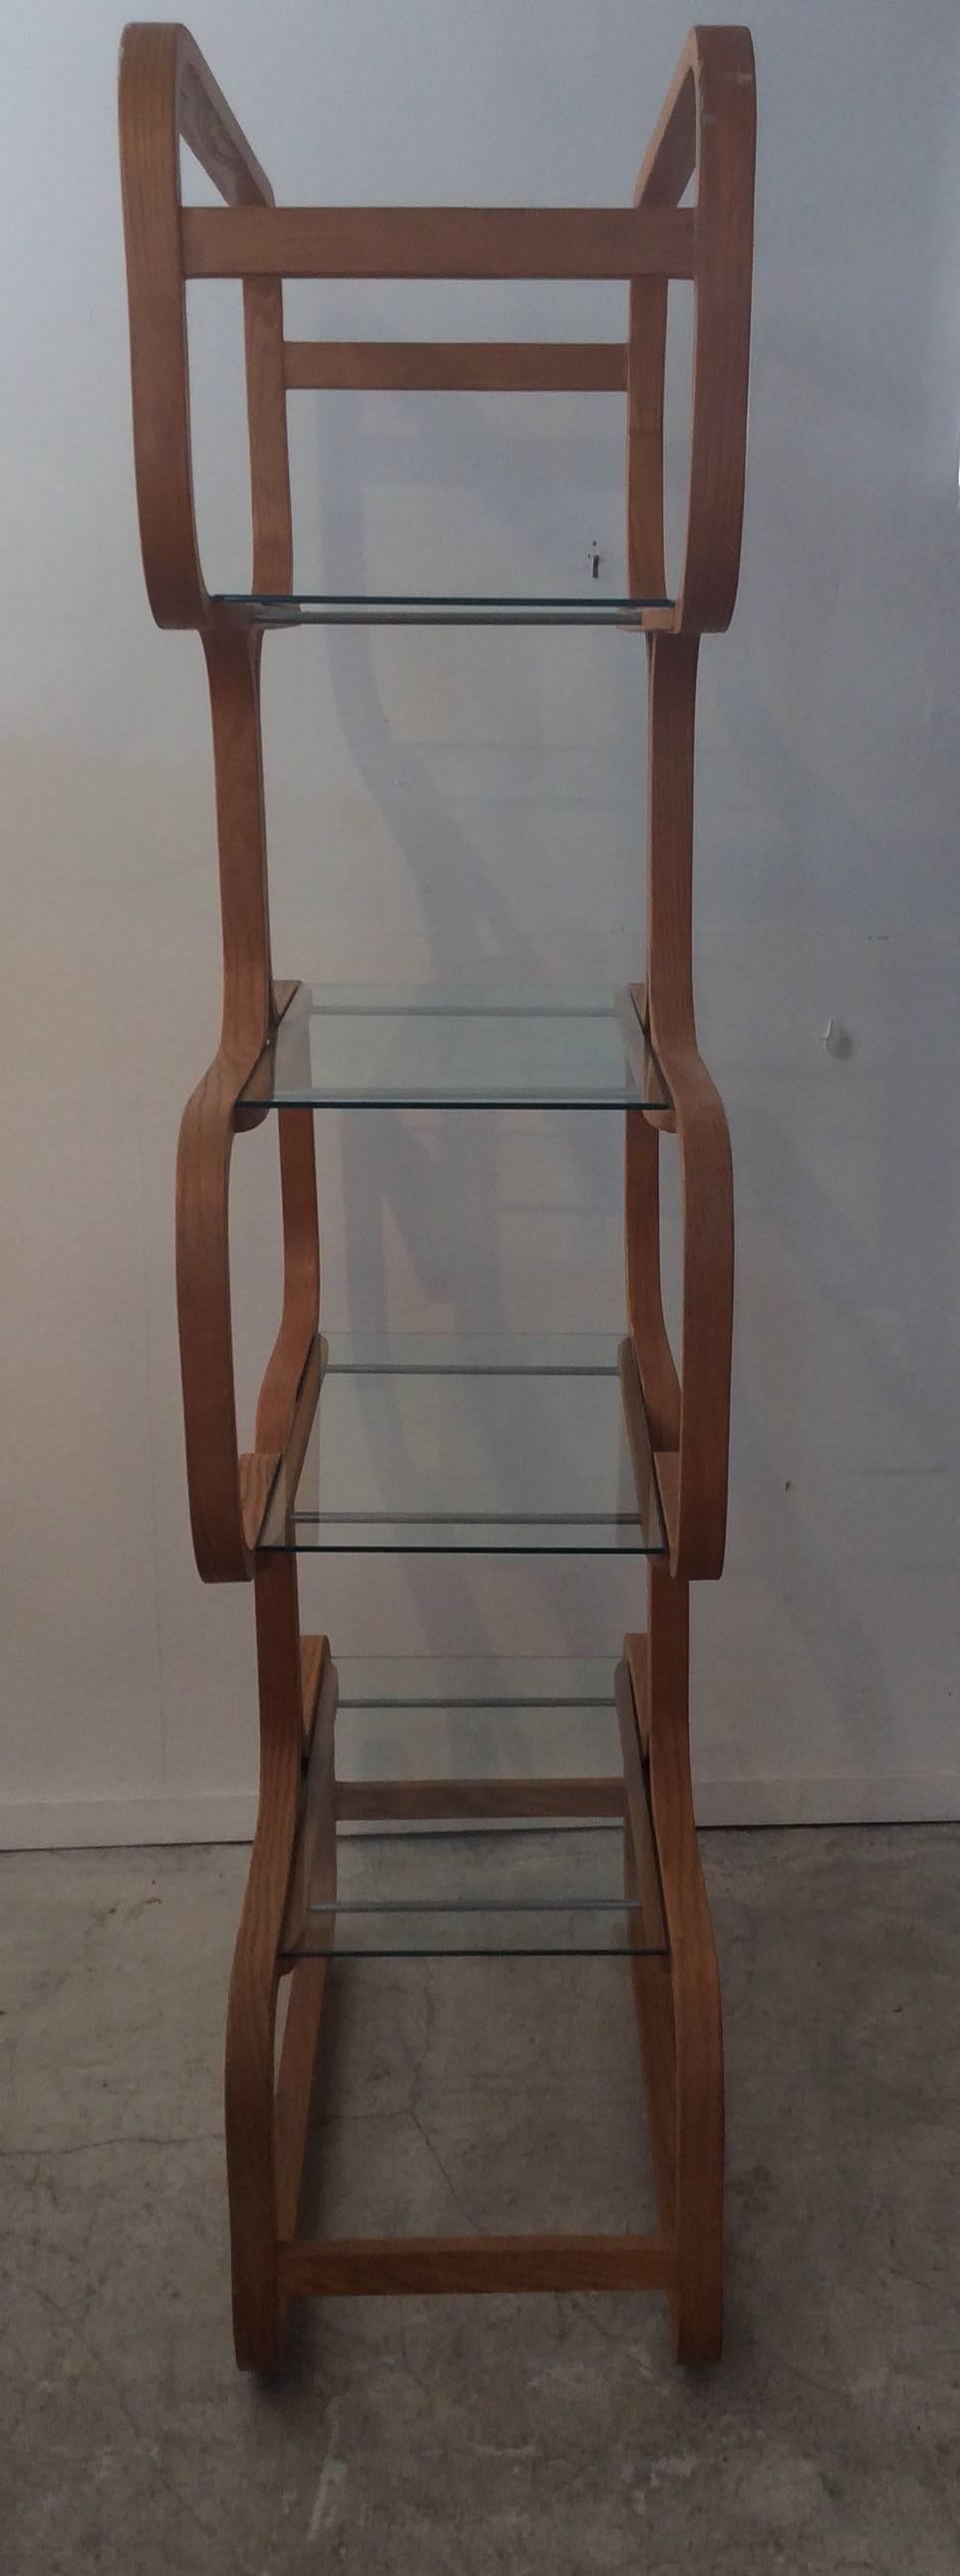 American Mid-Century Modern Sculptural Molded Plywood Glass Etagere Wormley Dunbar Style For Sale